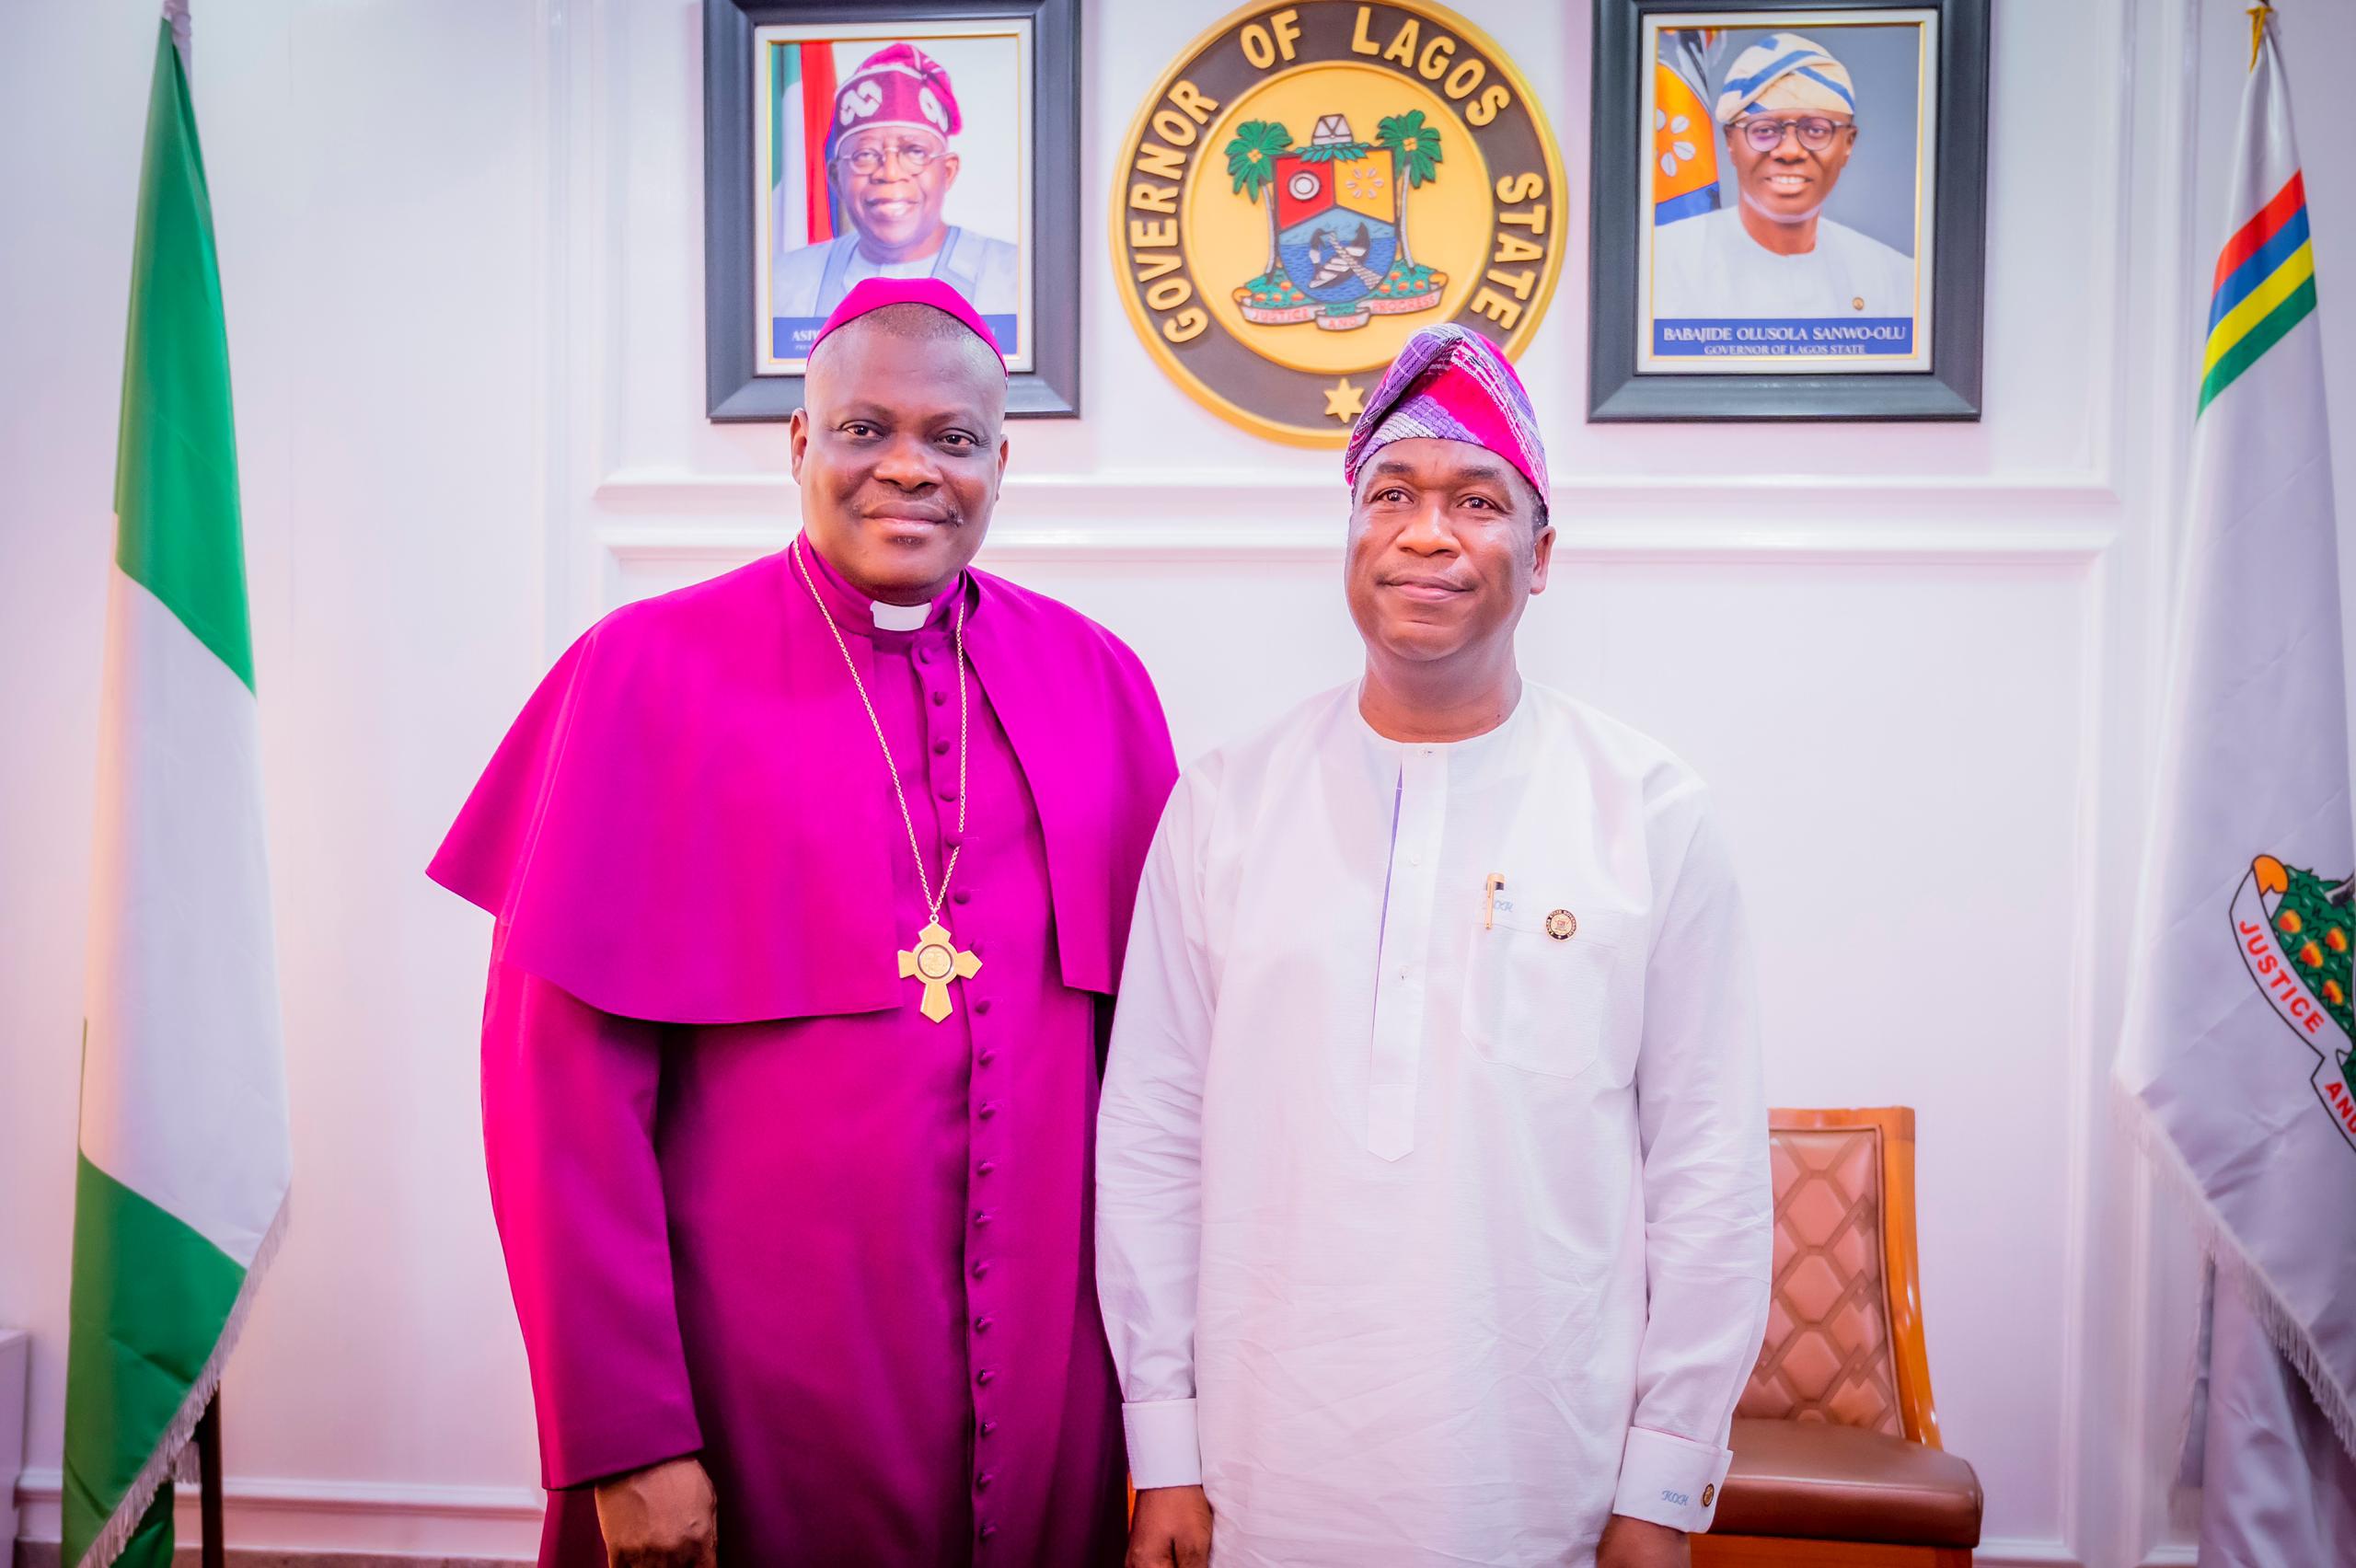 “We are Determined to Make a Difference, Leave Lasting Legacy in NCPC” – Bishop Adegbite